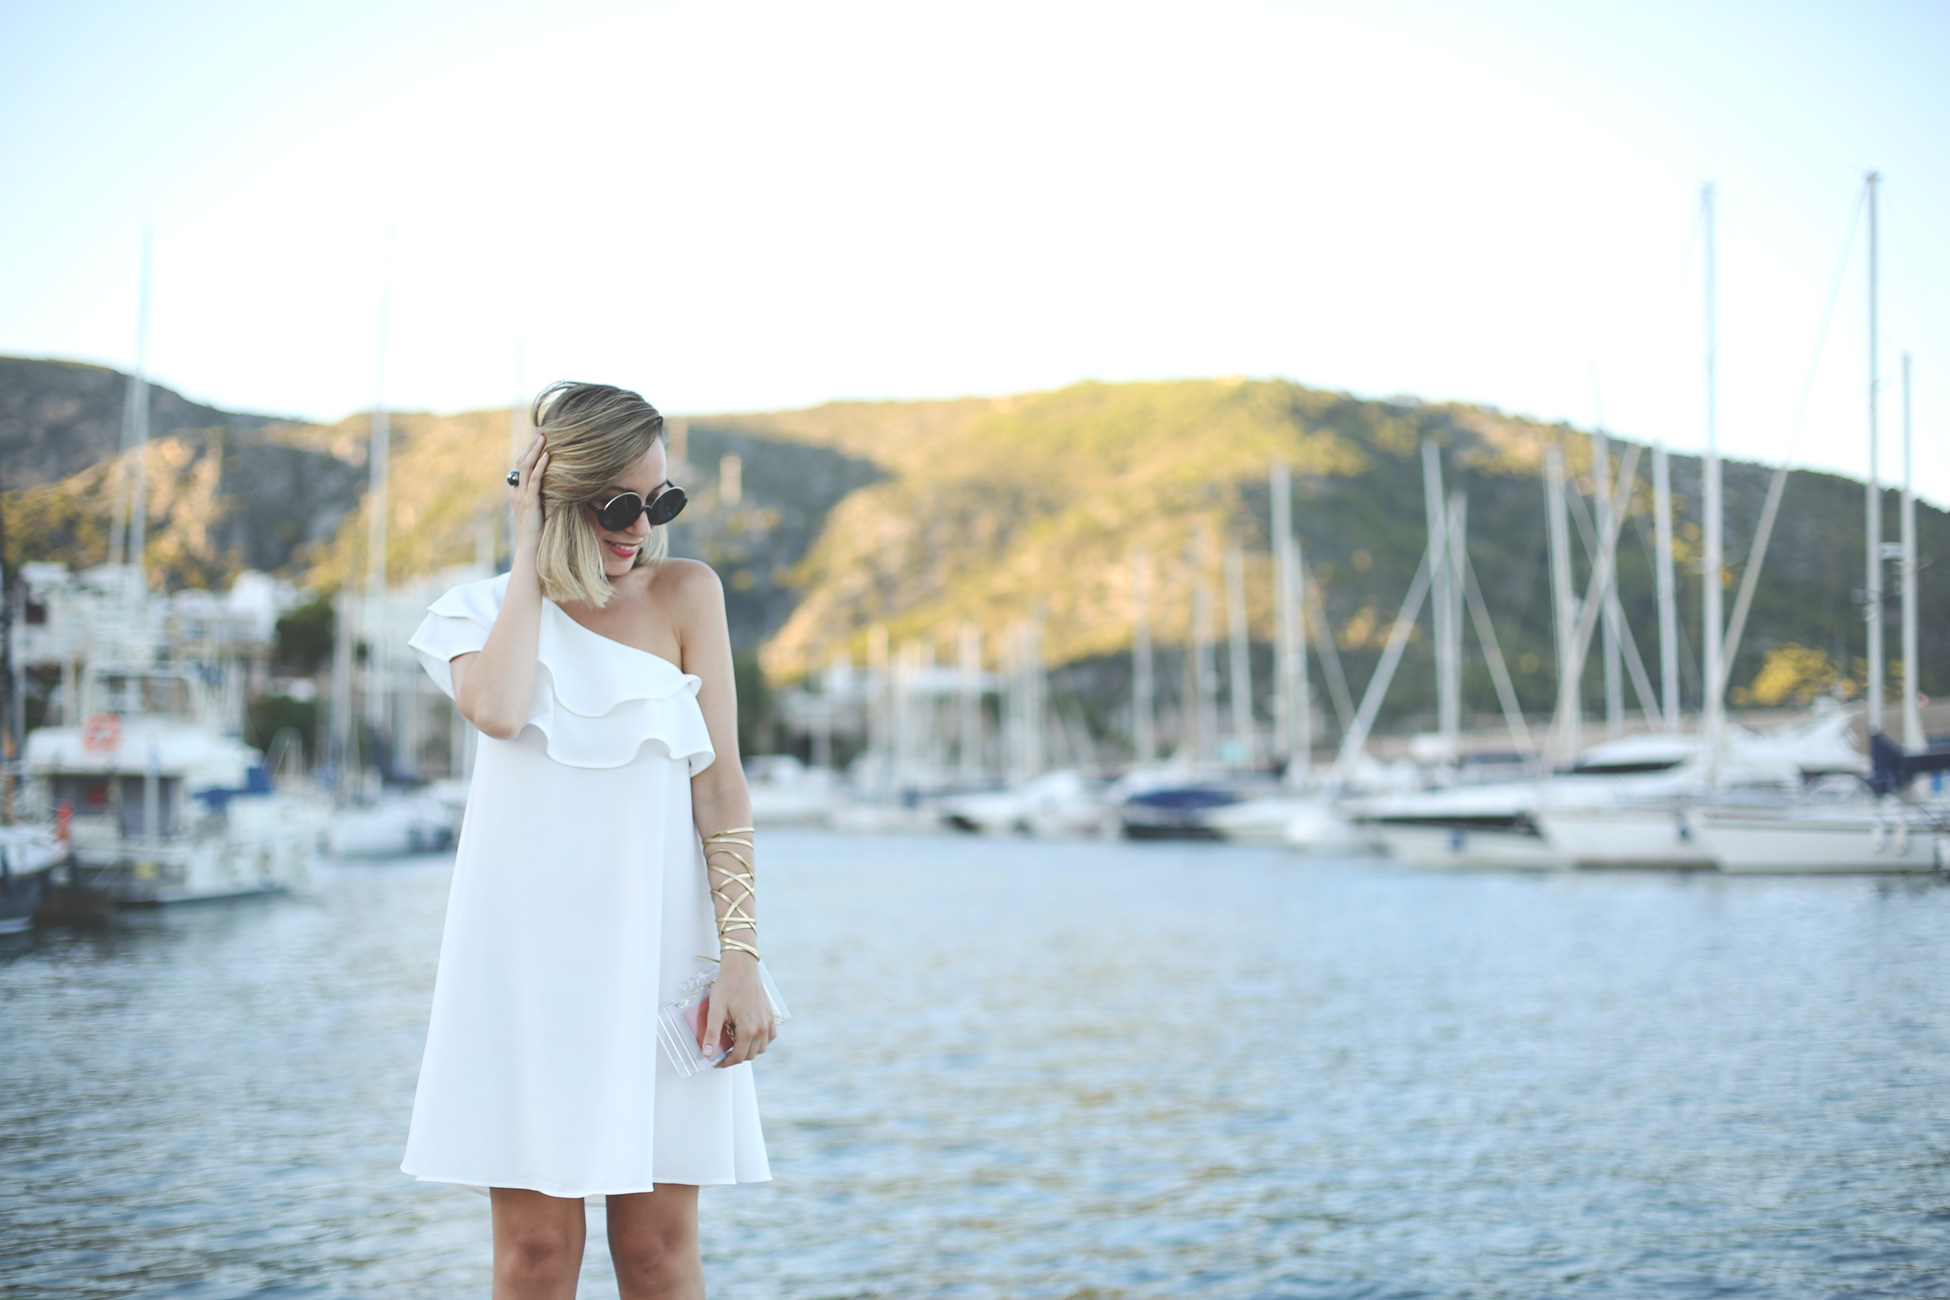 One shoulder Dress, Round sunglasses, clear clutch, earrings, summer dress, summer outfit, white dress